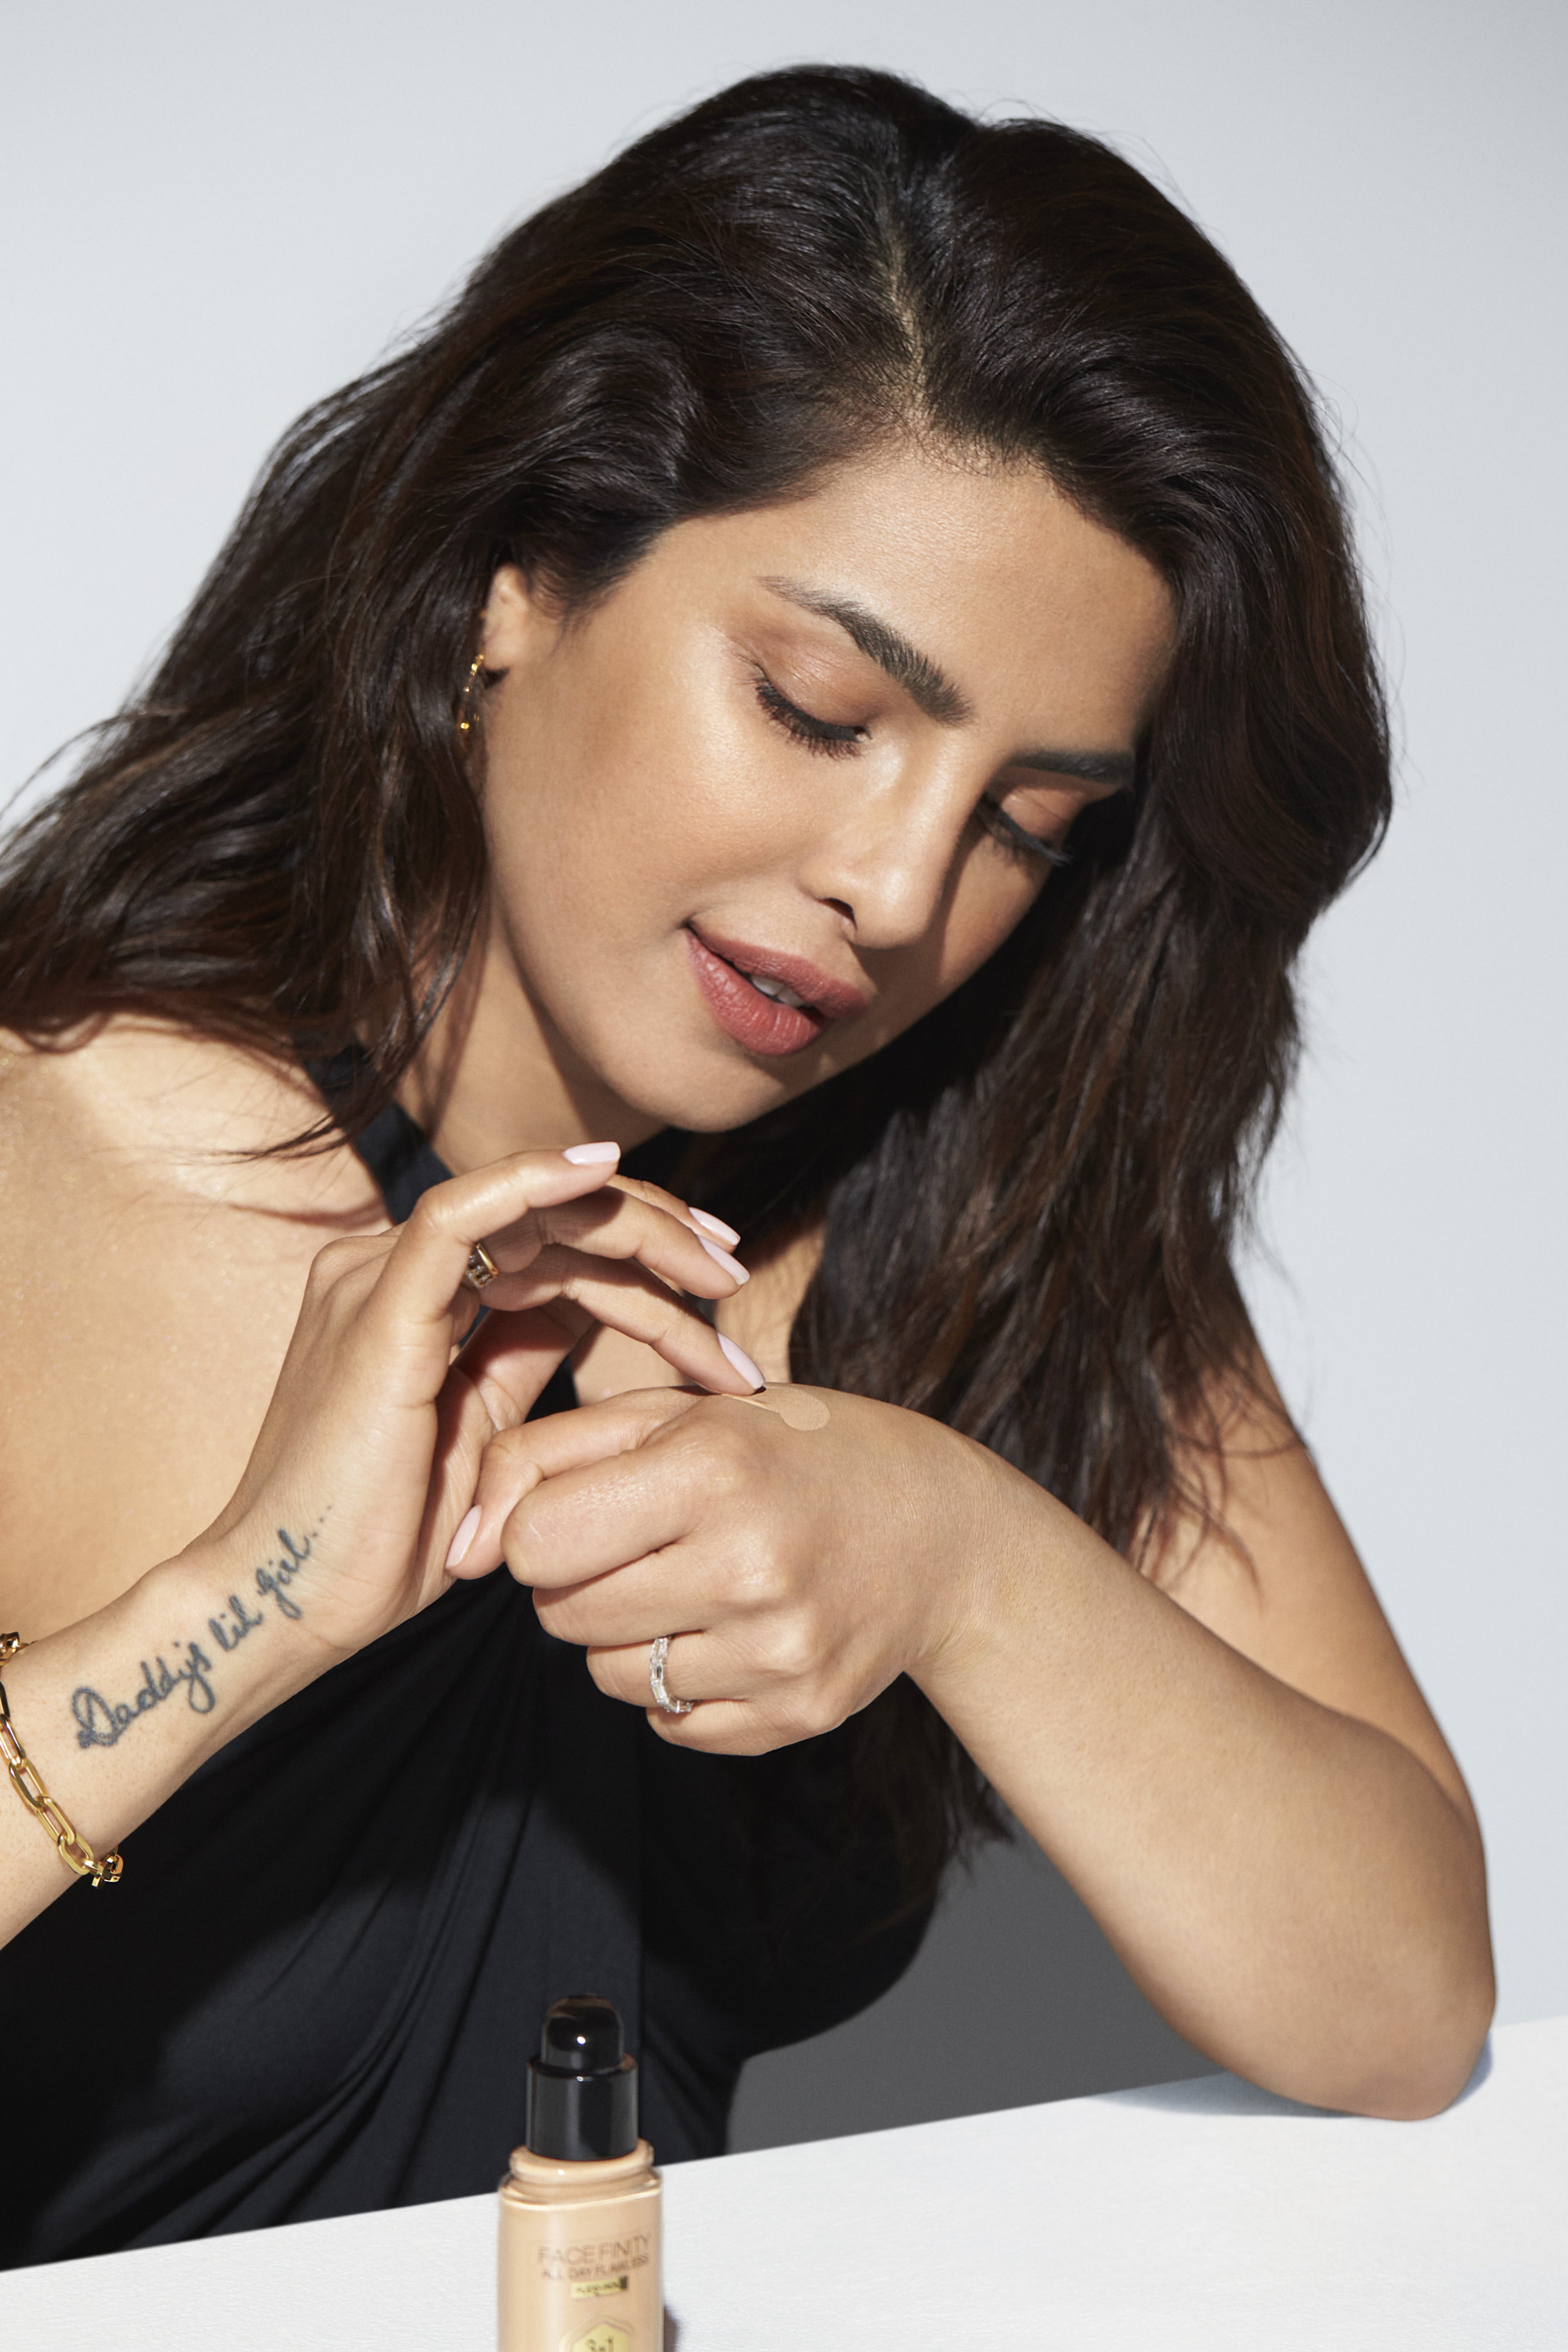 Priyanka Chopra on What Beauty Her Beauty Means to | POPSUGAR in 2021